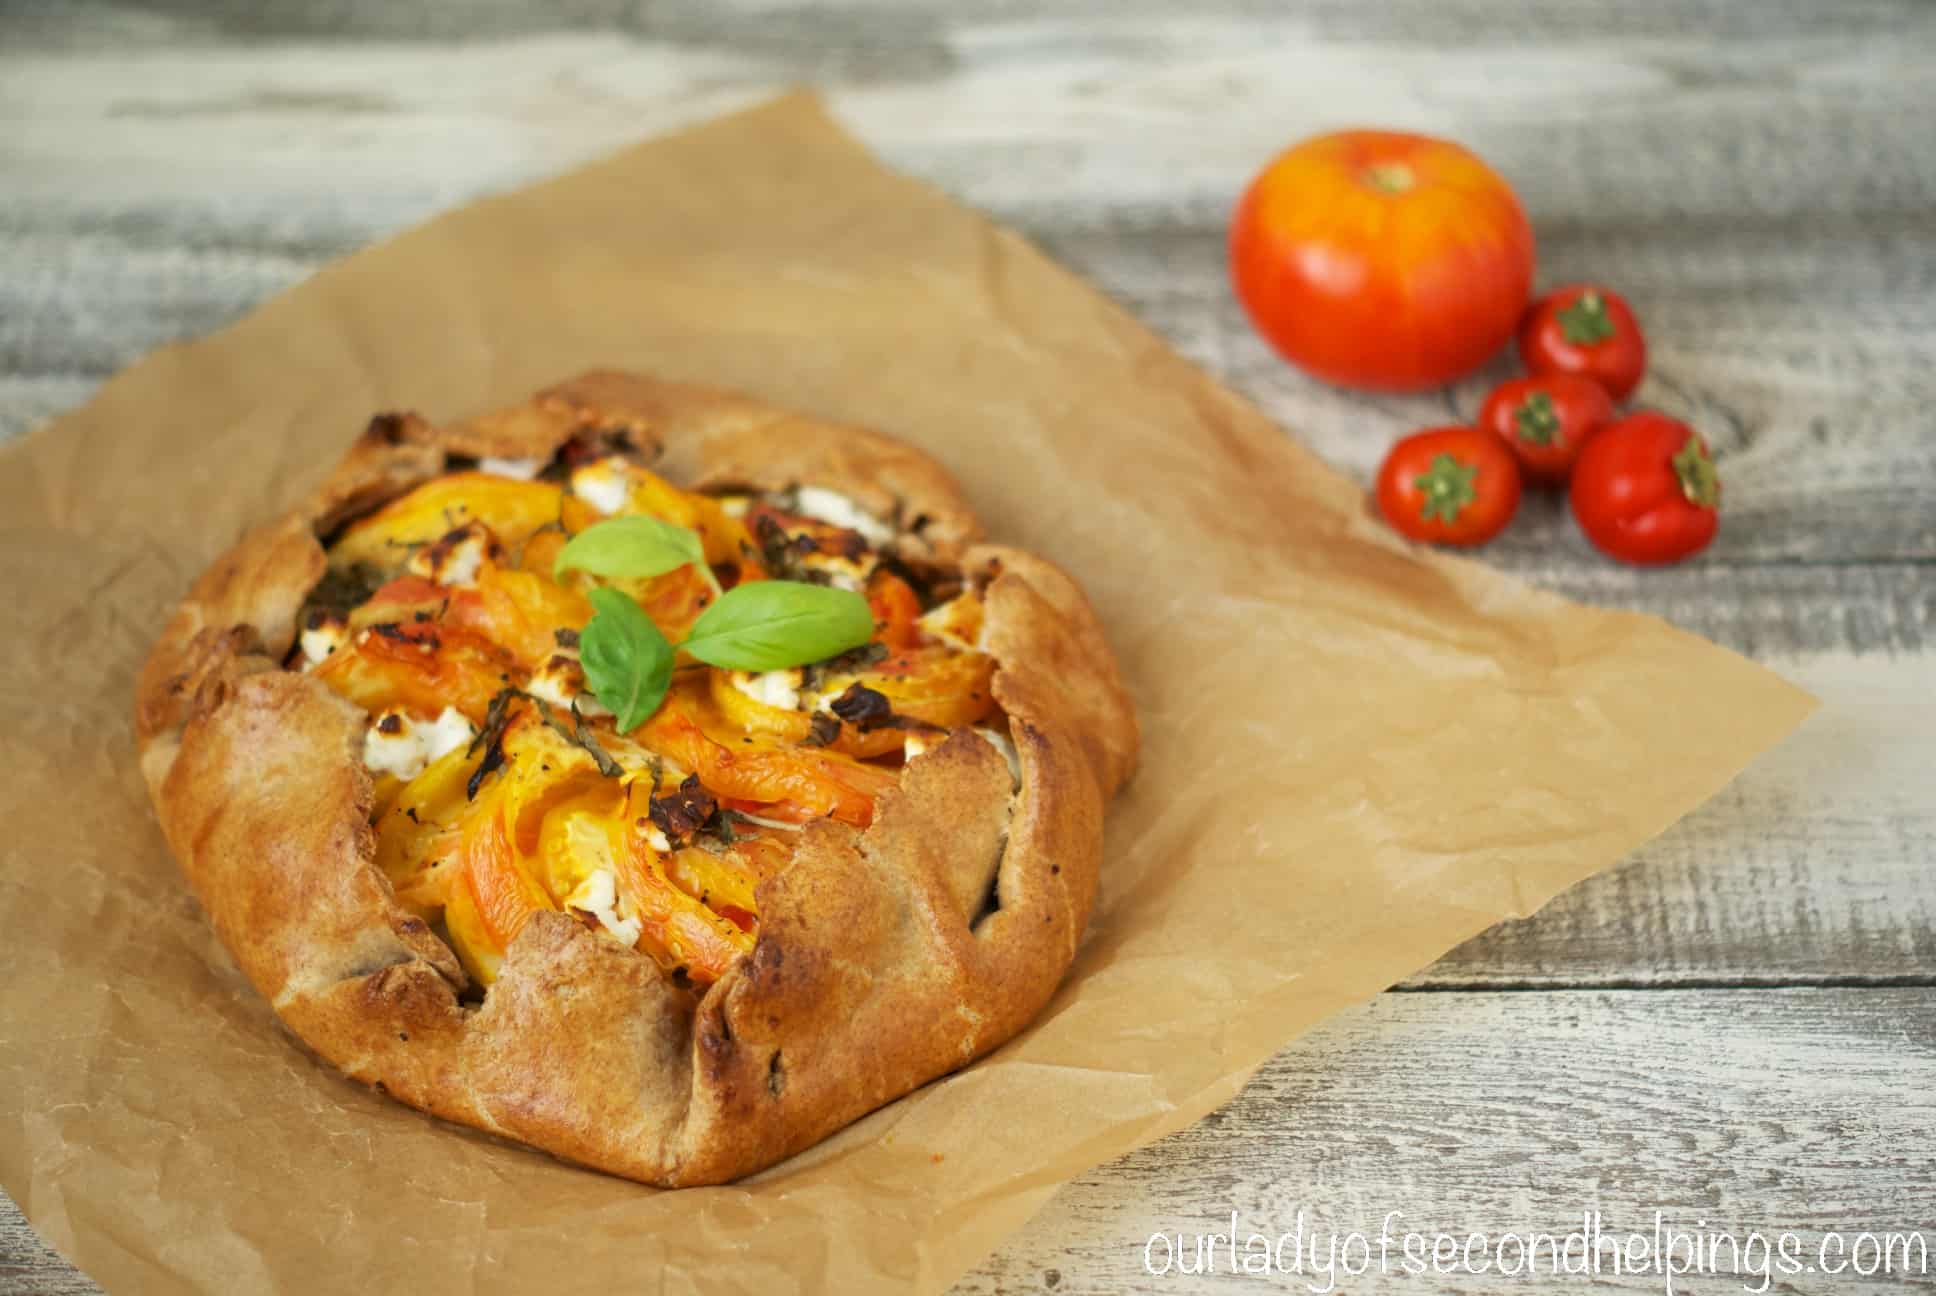 Tomato & Sweet Onion Galette | Our Lady of Second Helpings